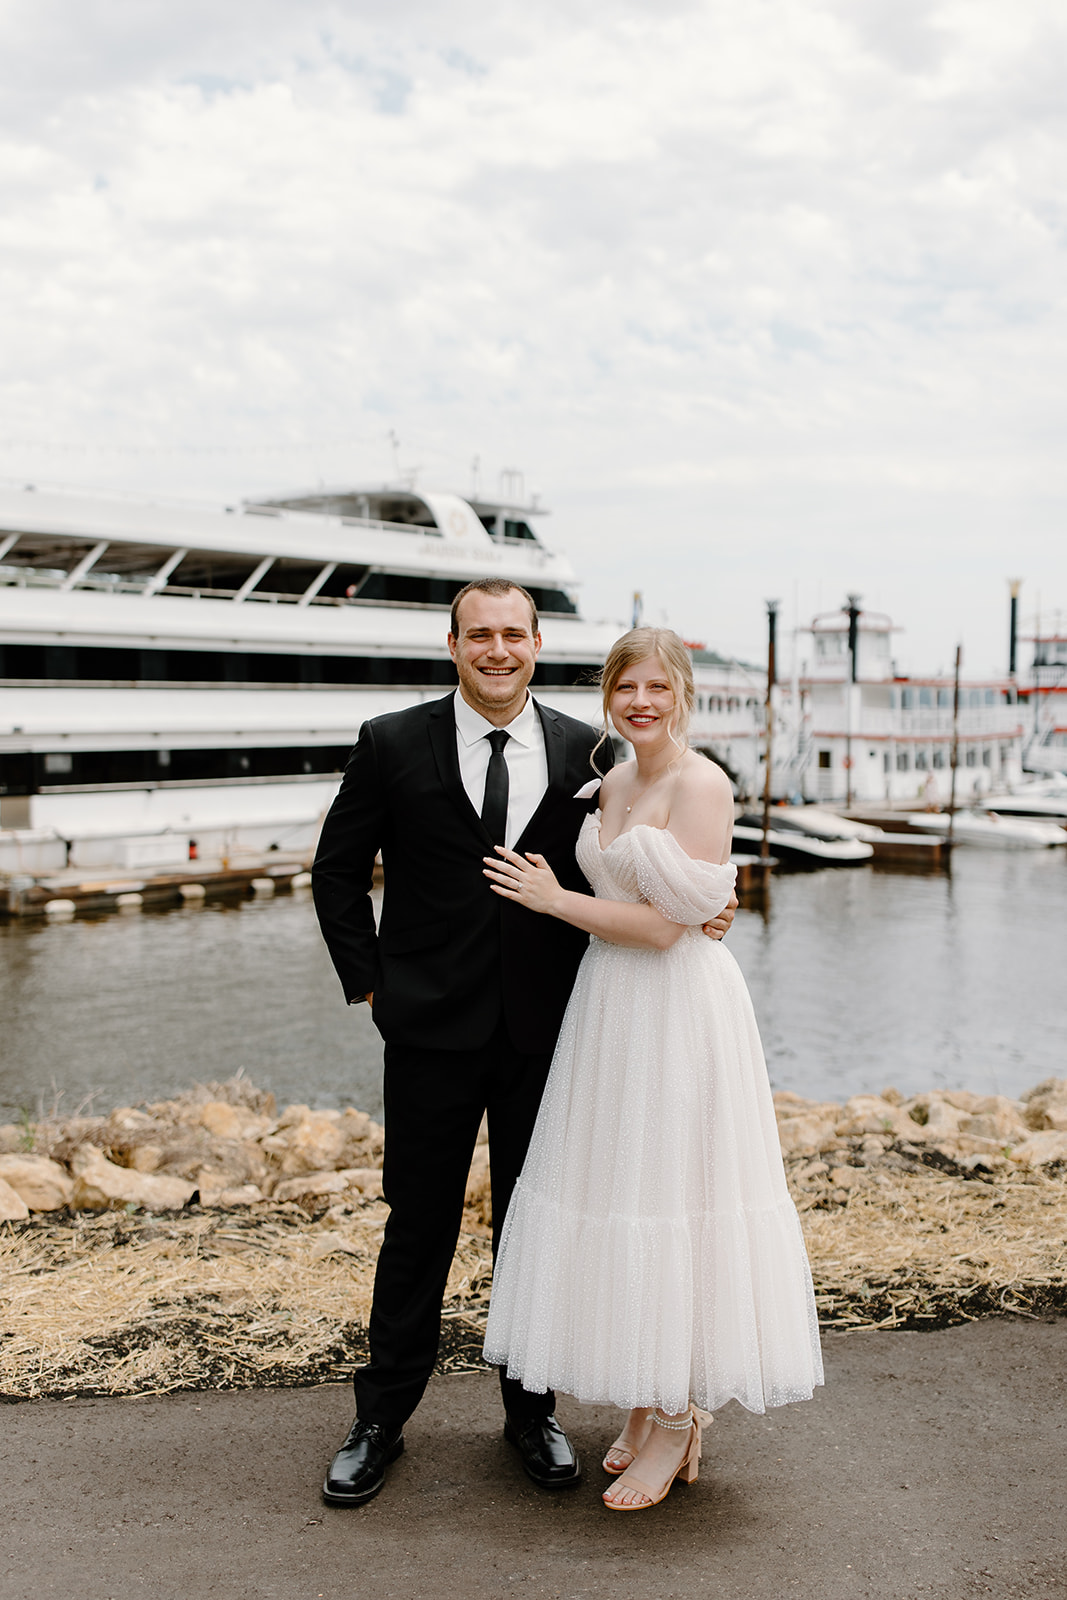 Bride and groom smile at the camera in front of a yacht